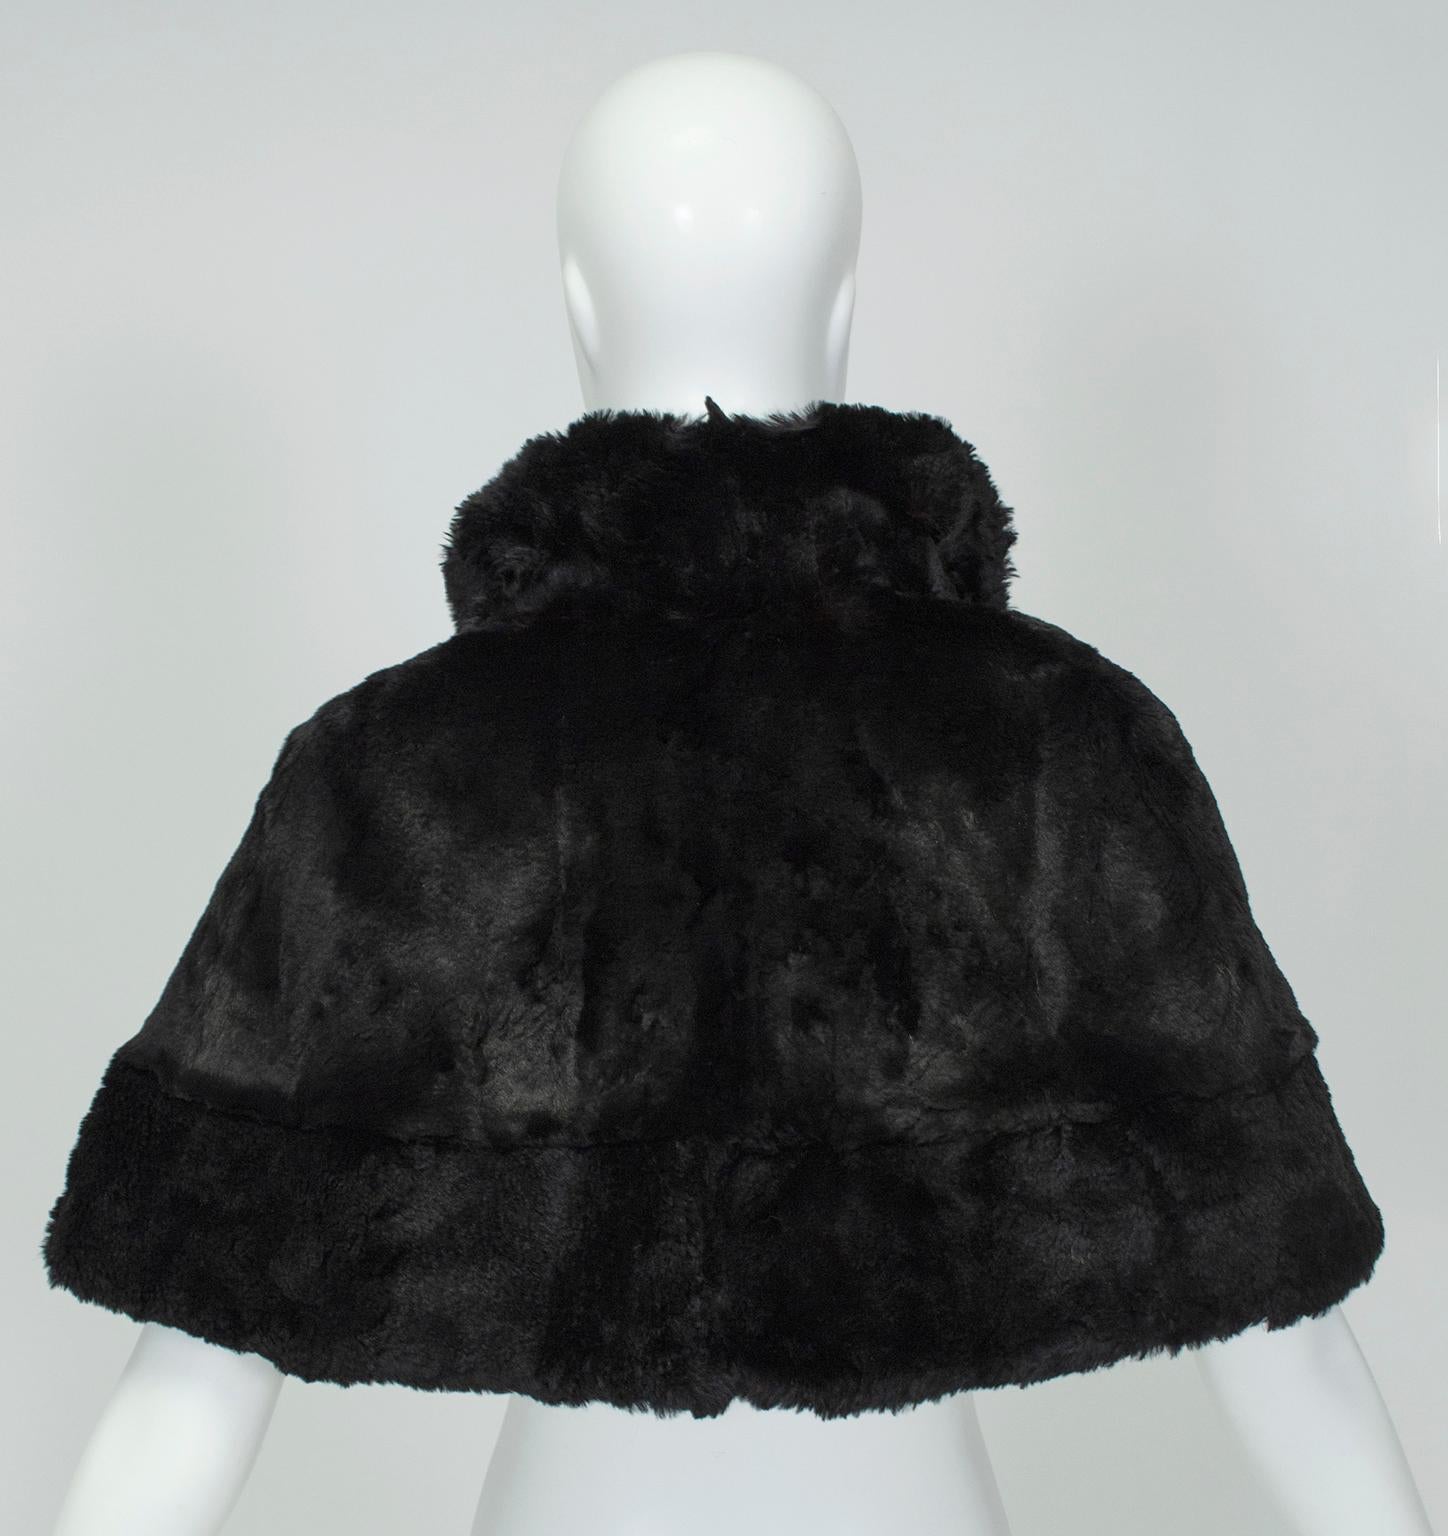 Women's Black Shearling Capelet Stole with Shawl Collar, 1950s